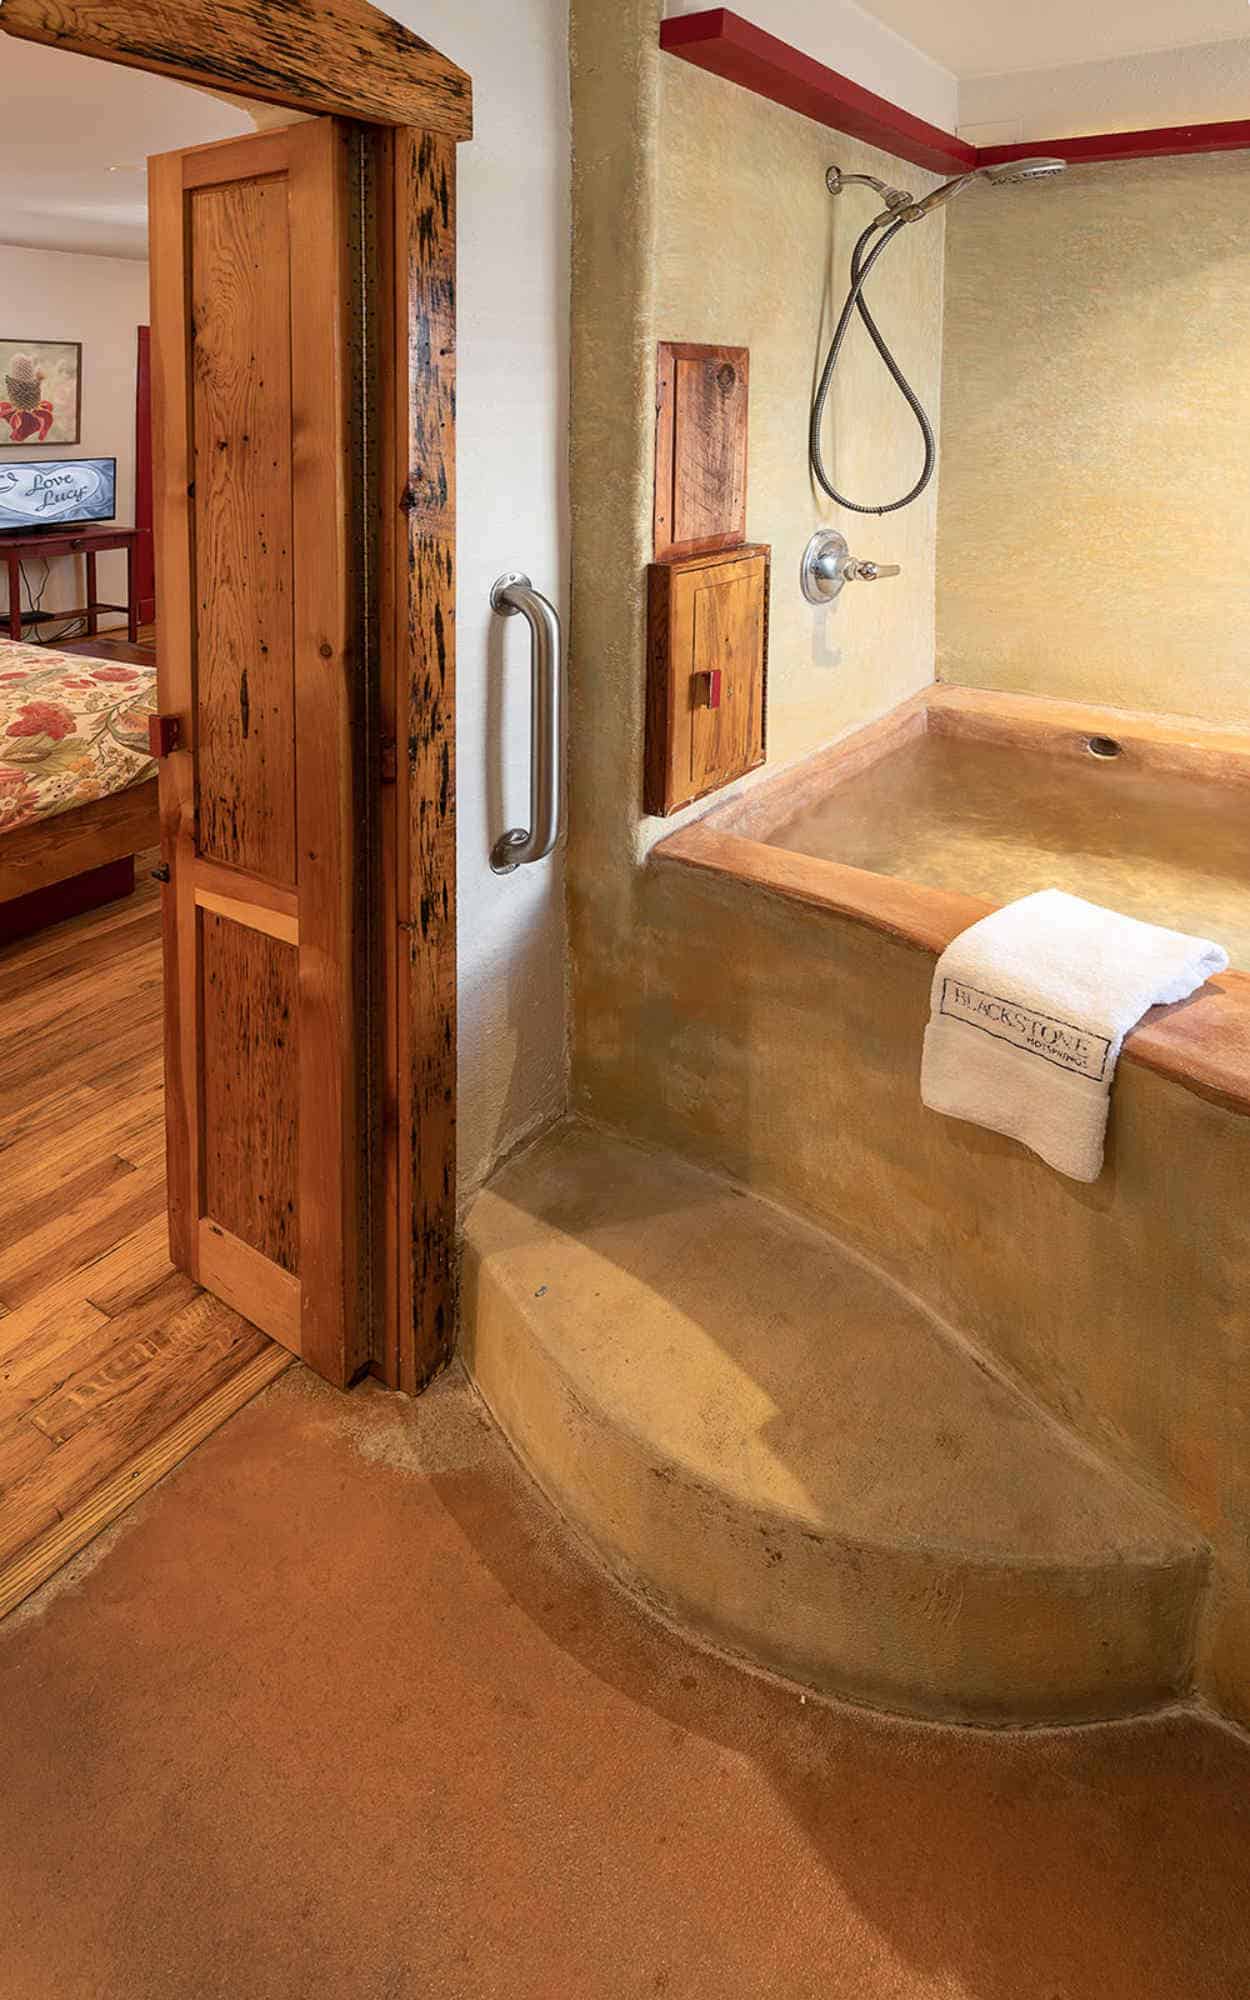 in-room bath, Babaloo room, Blackstone hot springs, Truth or Consequences NM